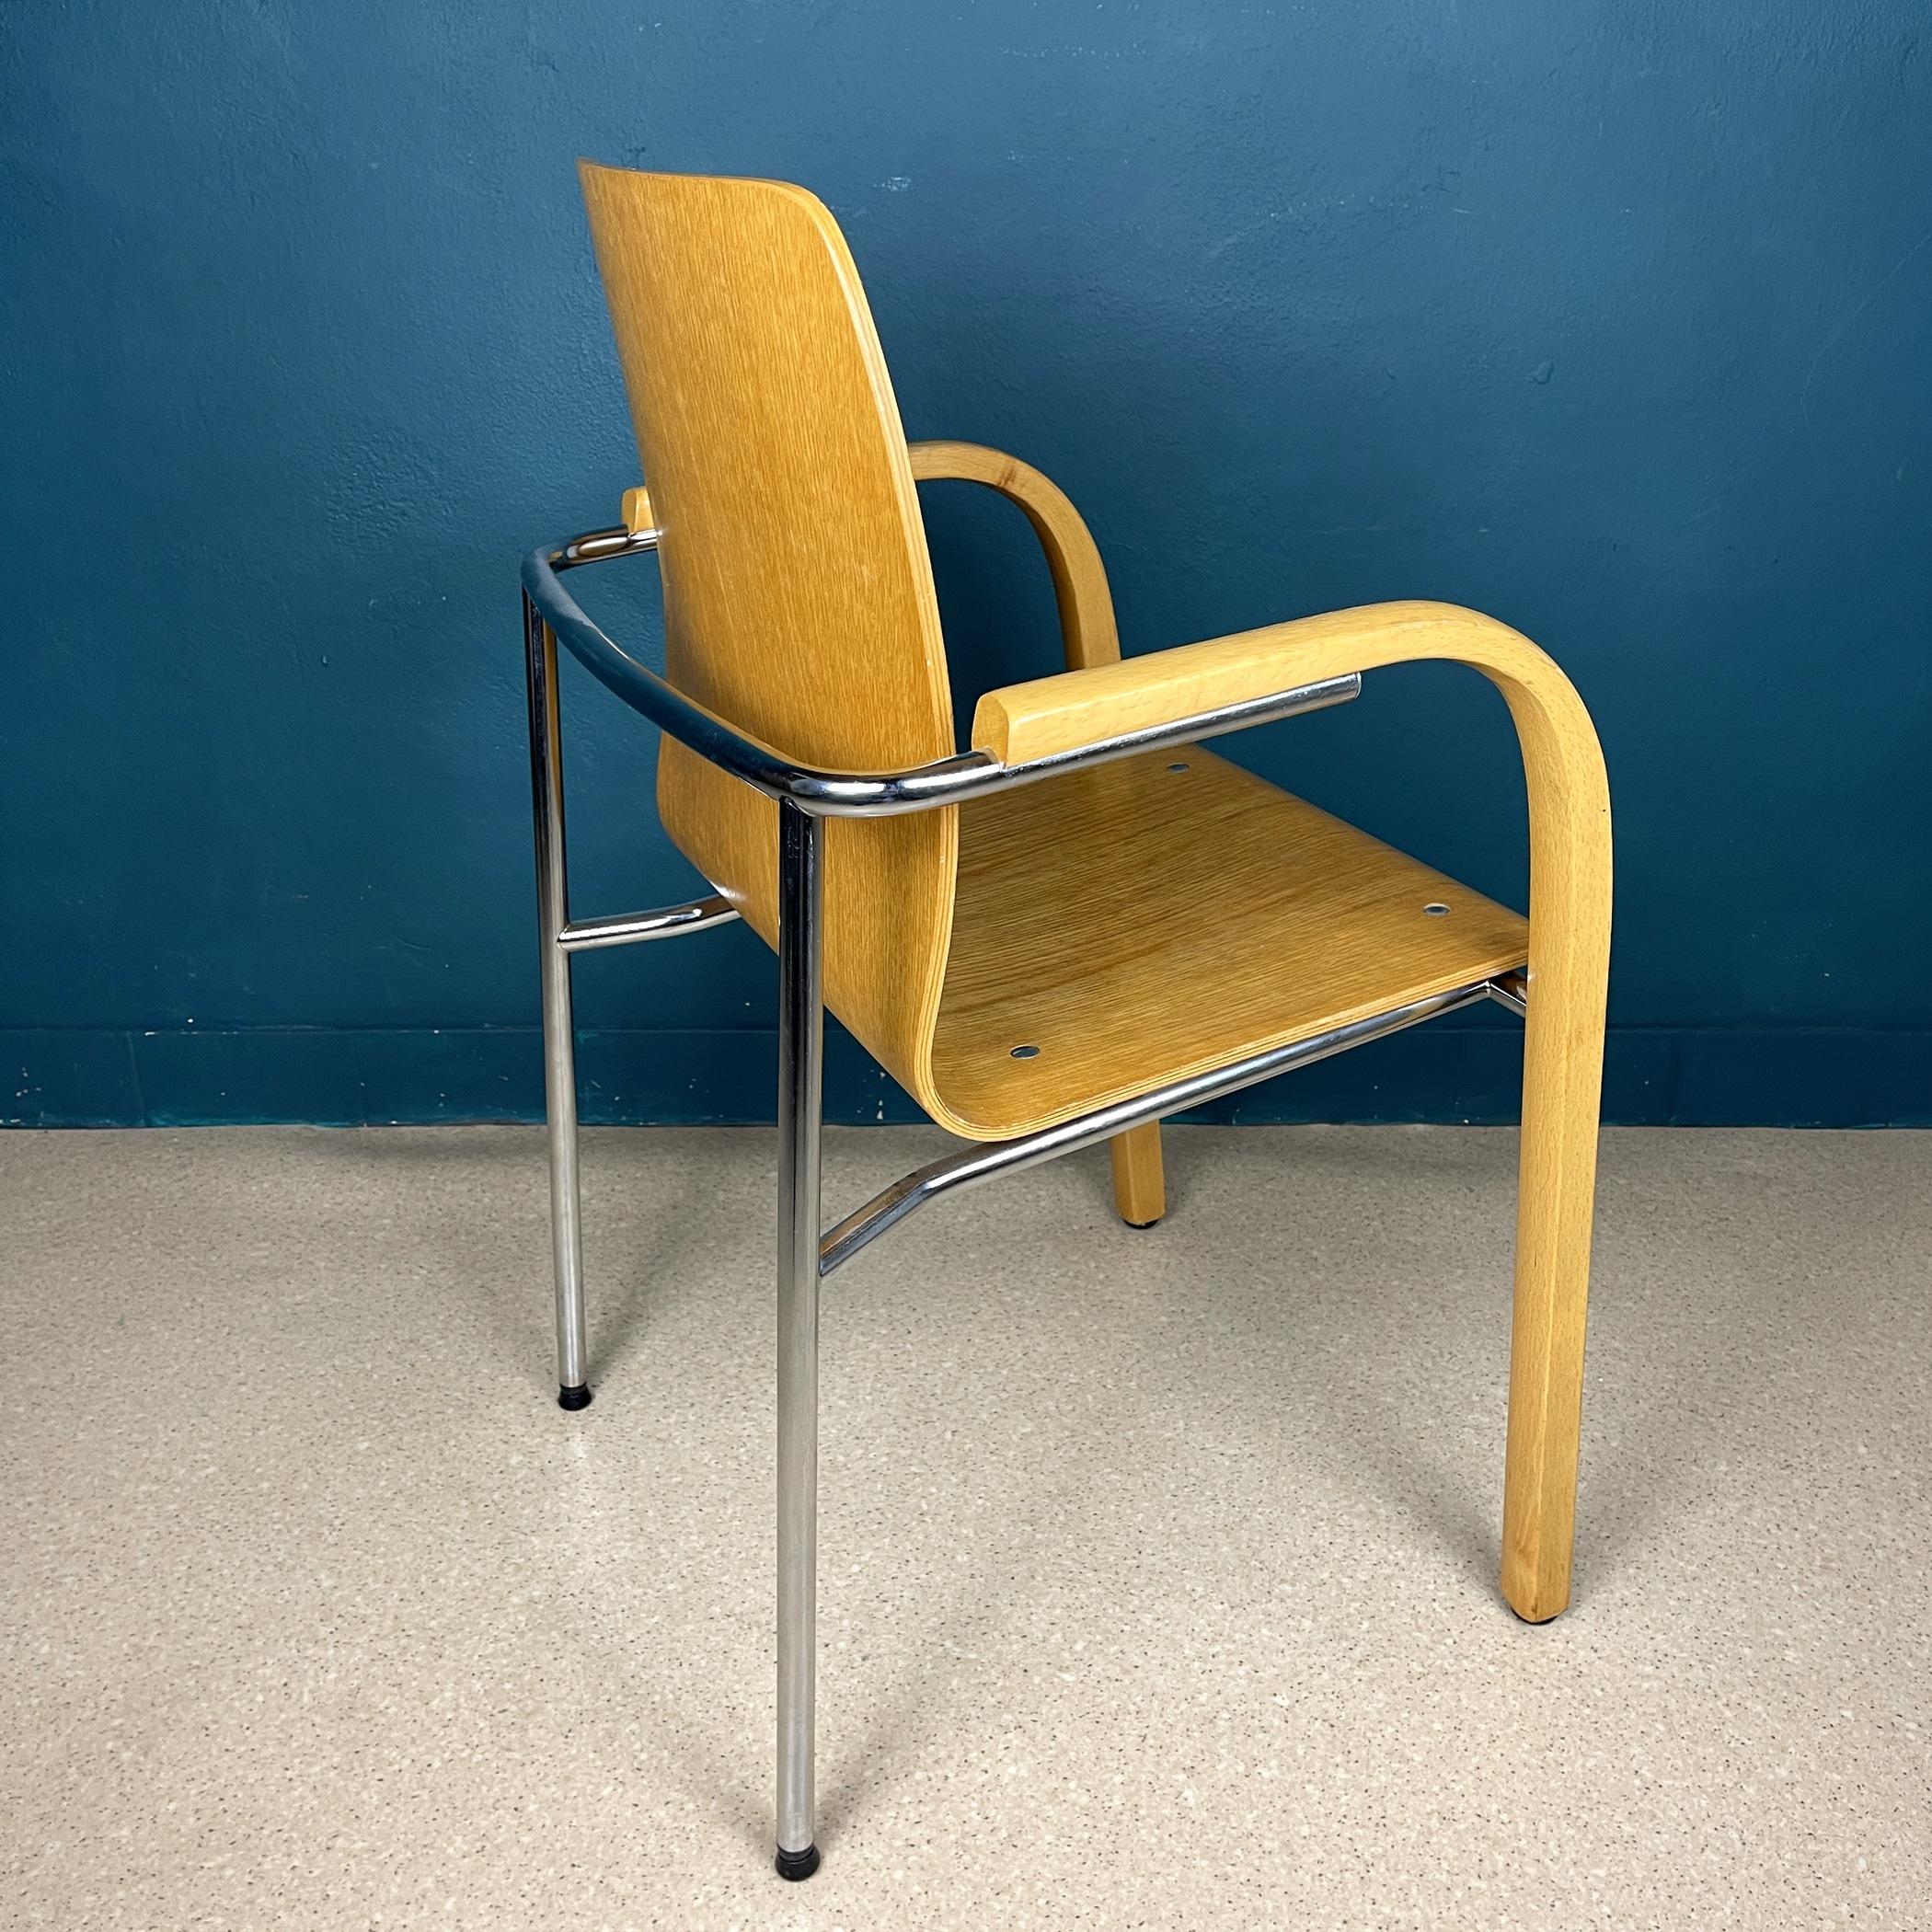 Metal Mid-Century Dining Chair by Stol Kamnik from Yugoslavia, 1980s For Sale